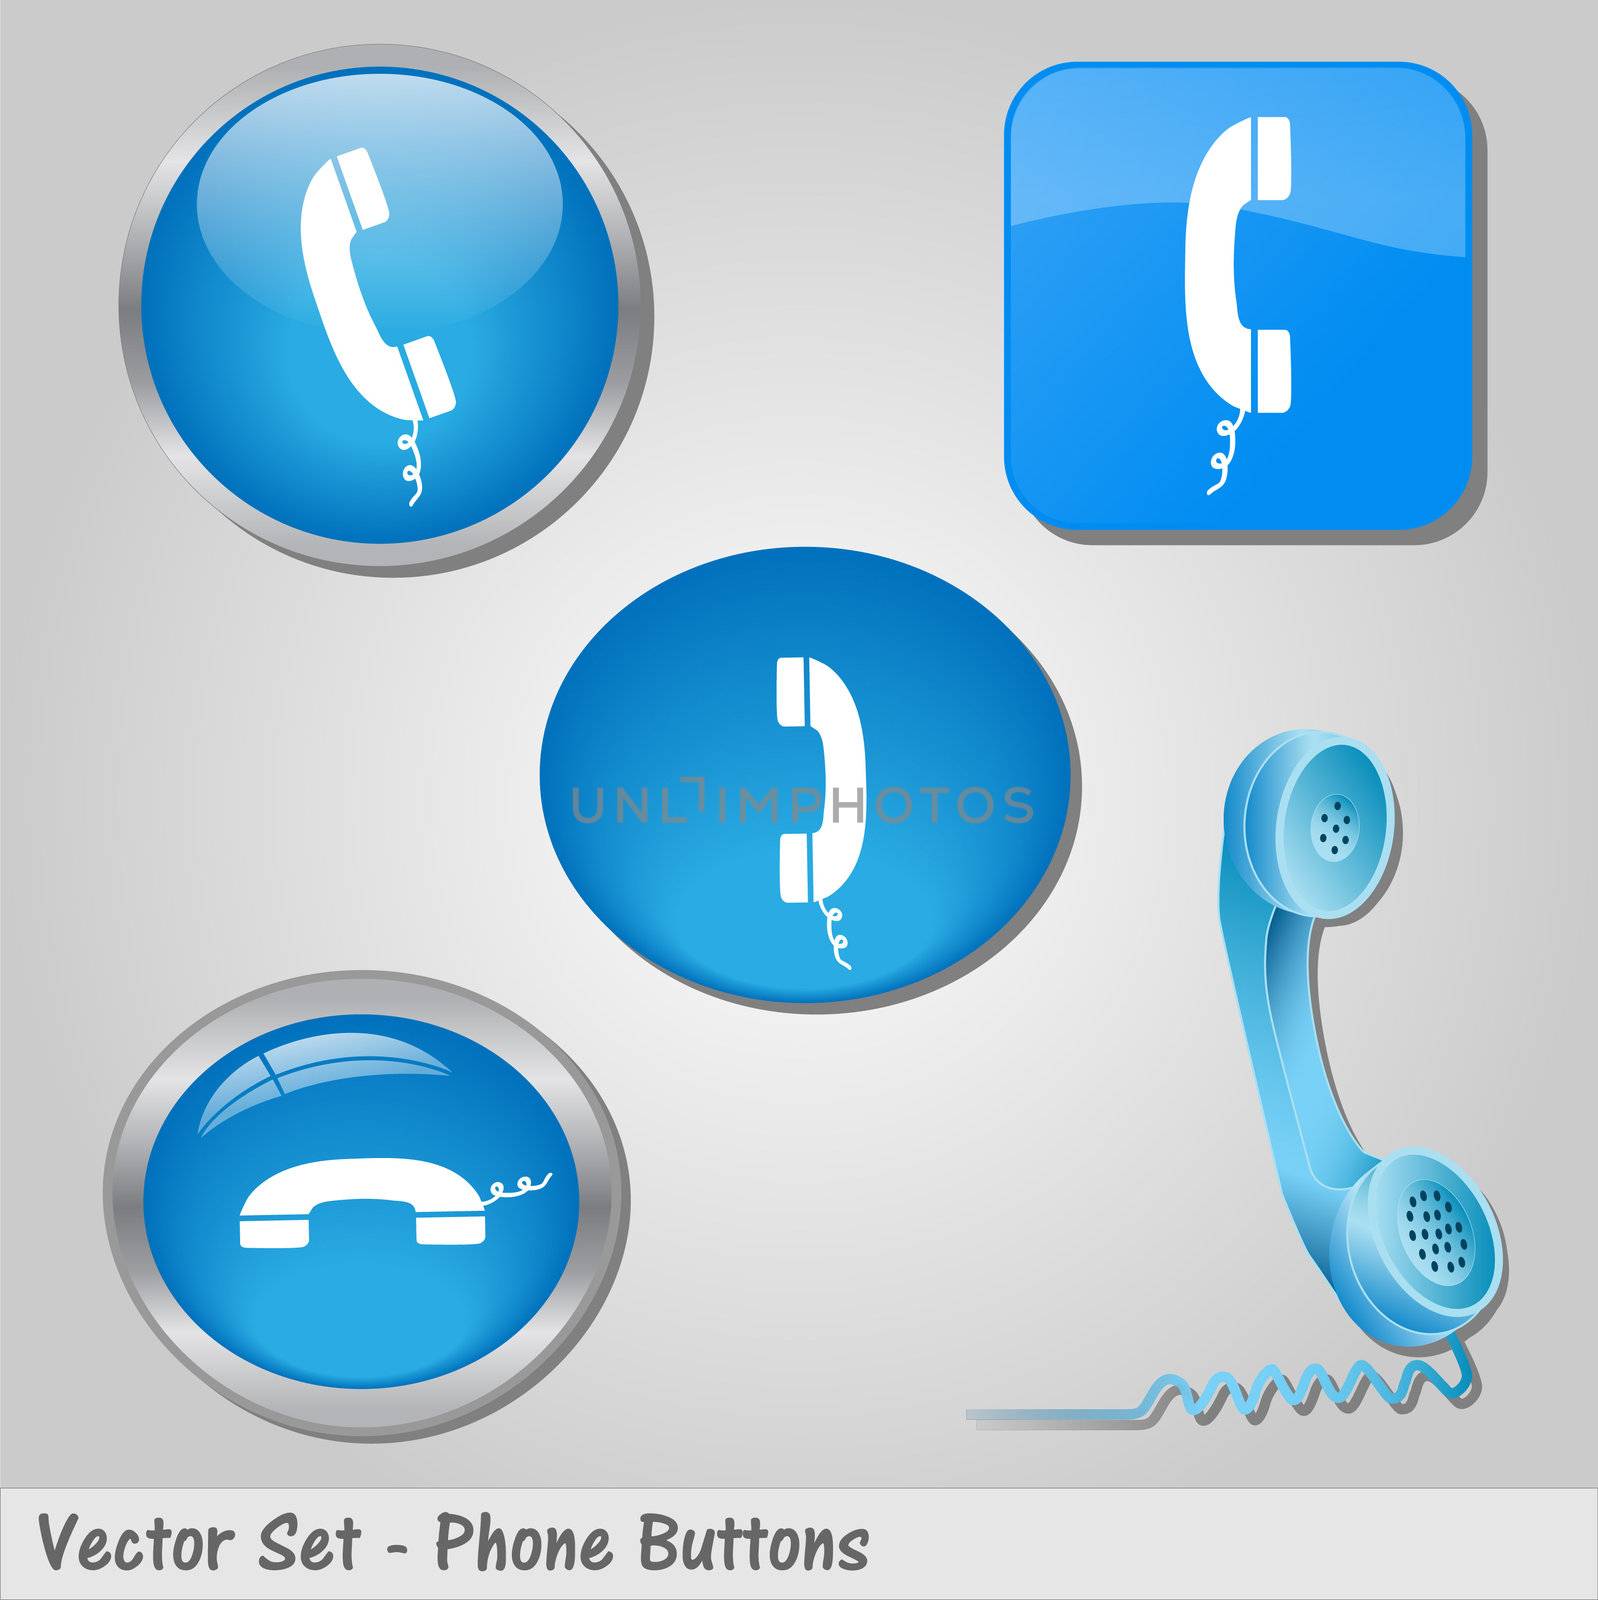 Image of various colorful blue phone buttons.